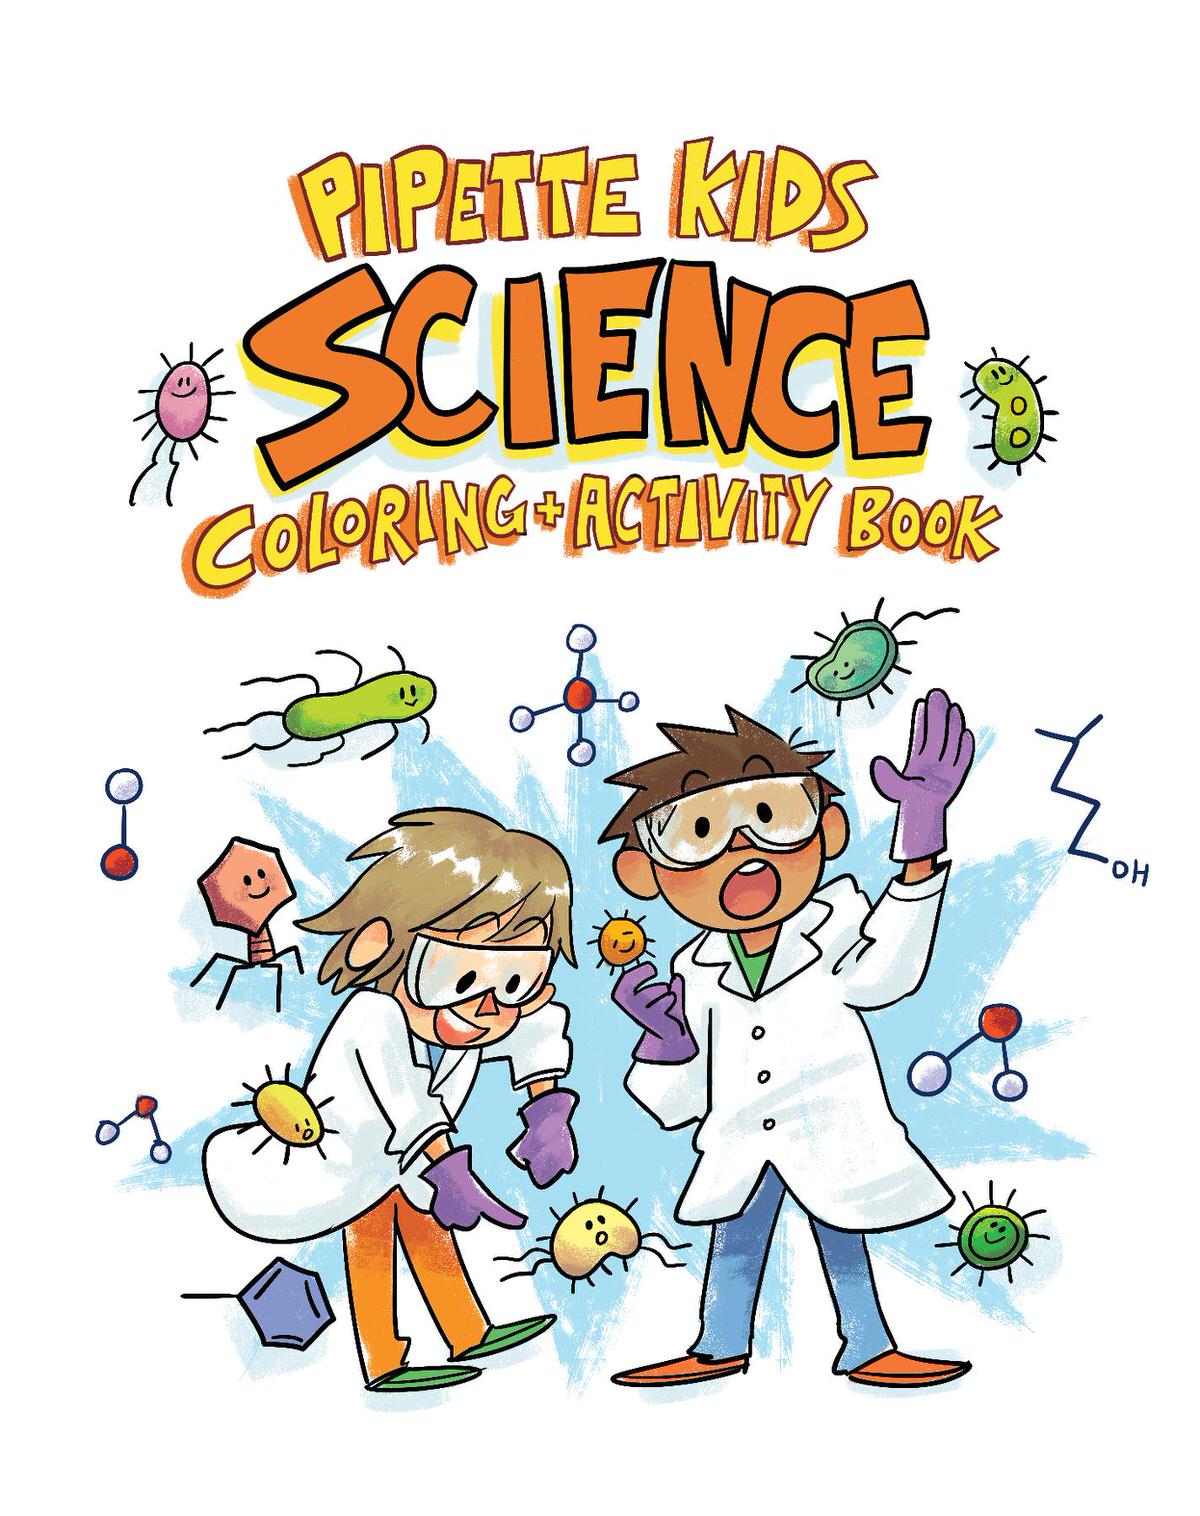 Pipette Kids Science Coloring and Activity Book